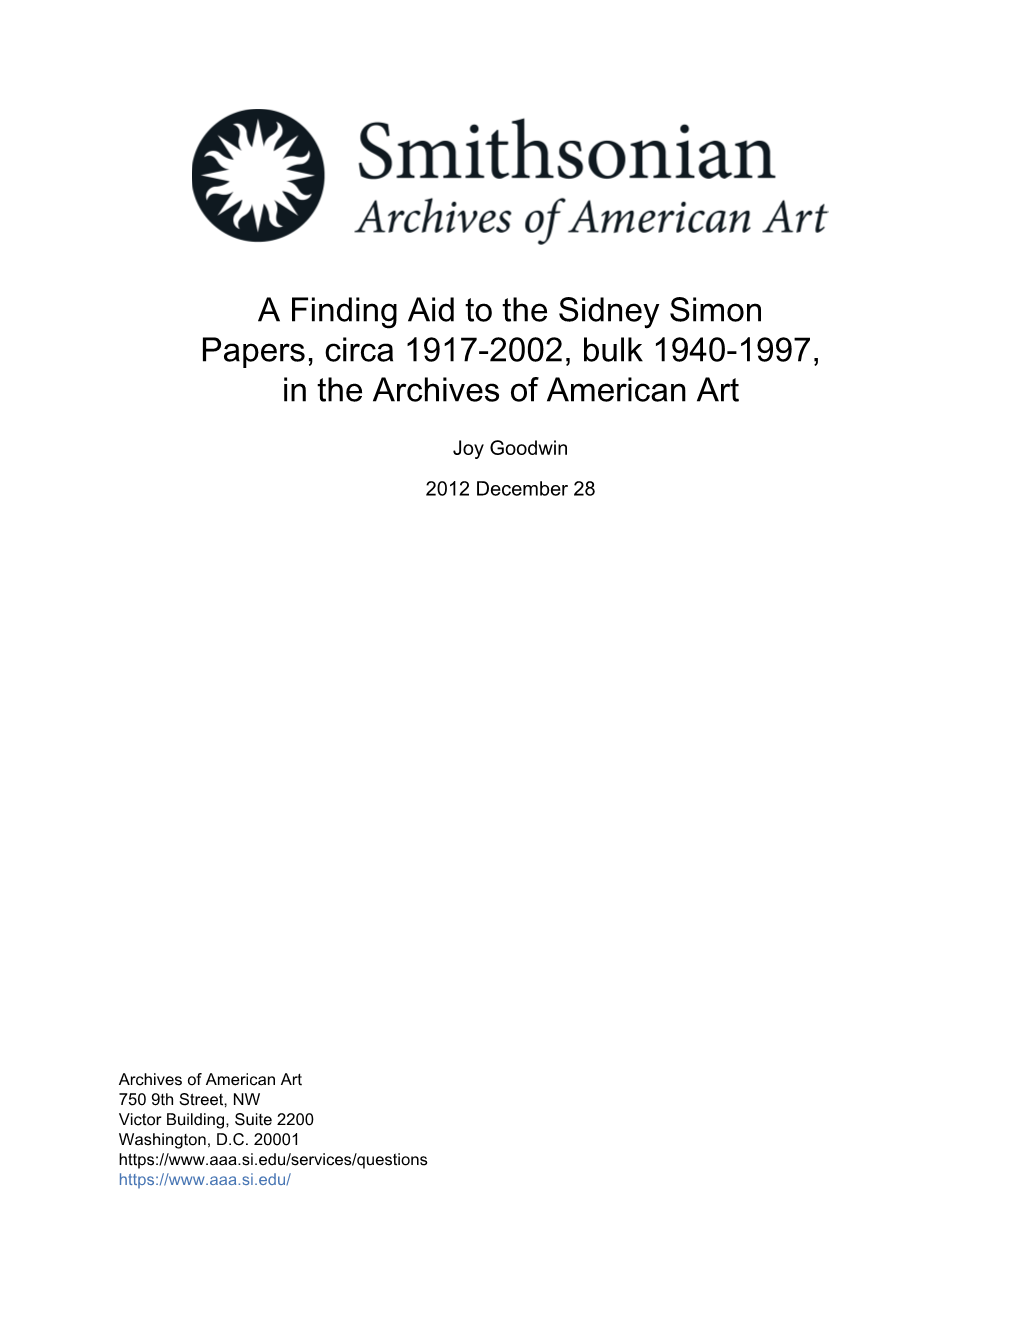 A Finding Aid to the Sidney Simon Papers, Circa 1917-2002, Bulk 1940-1997, in the Archives of American Art